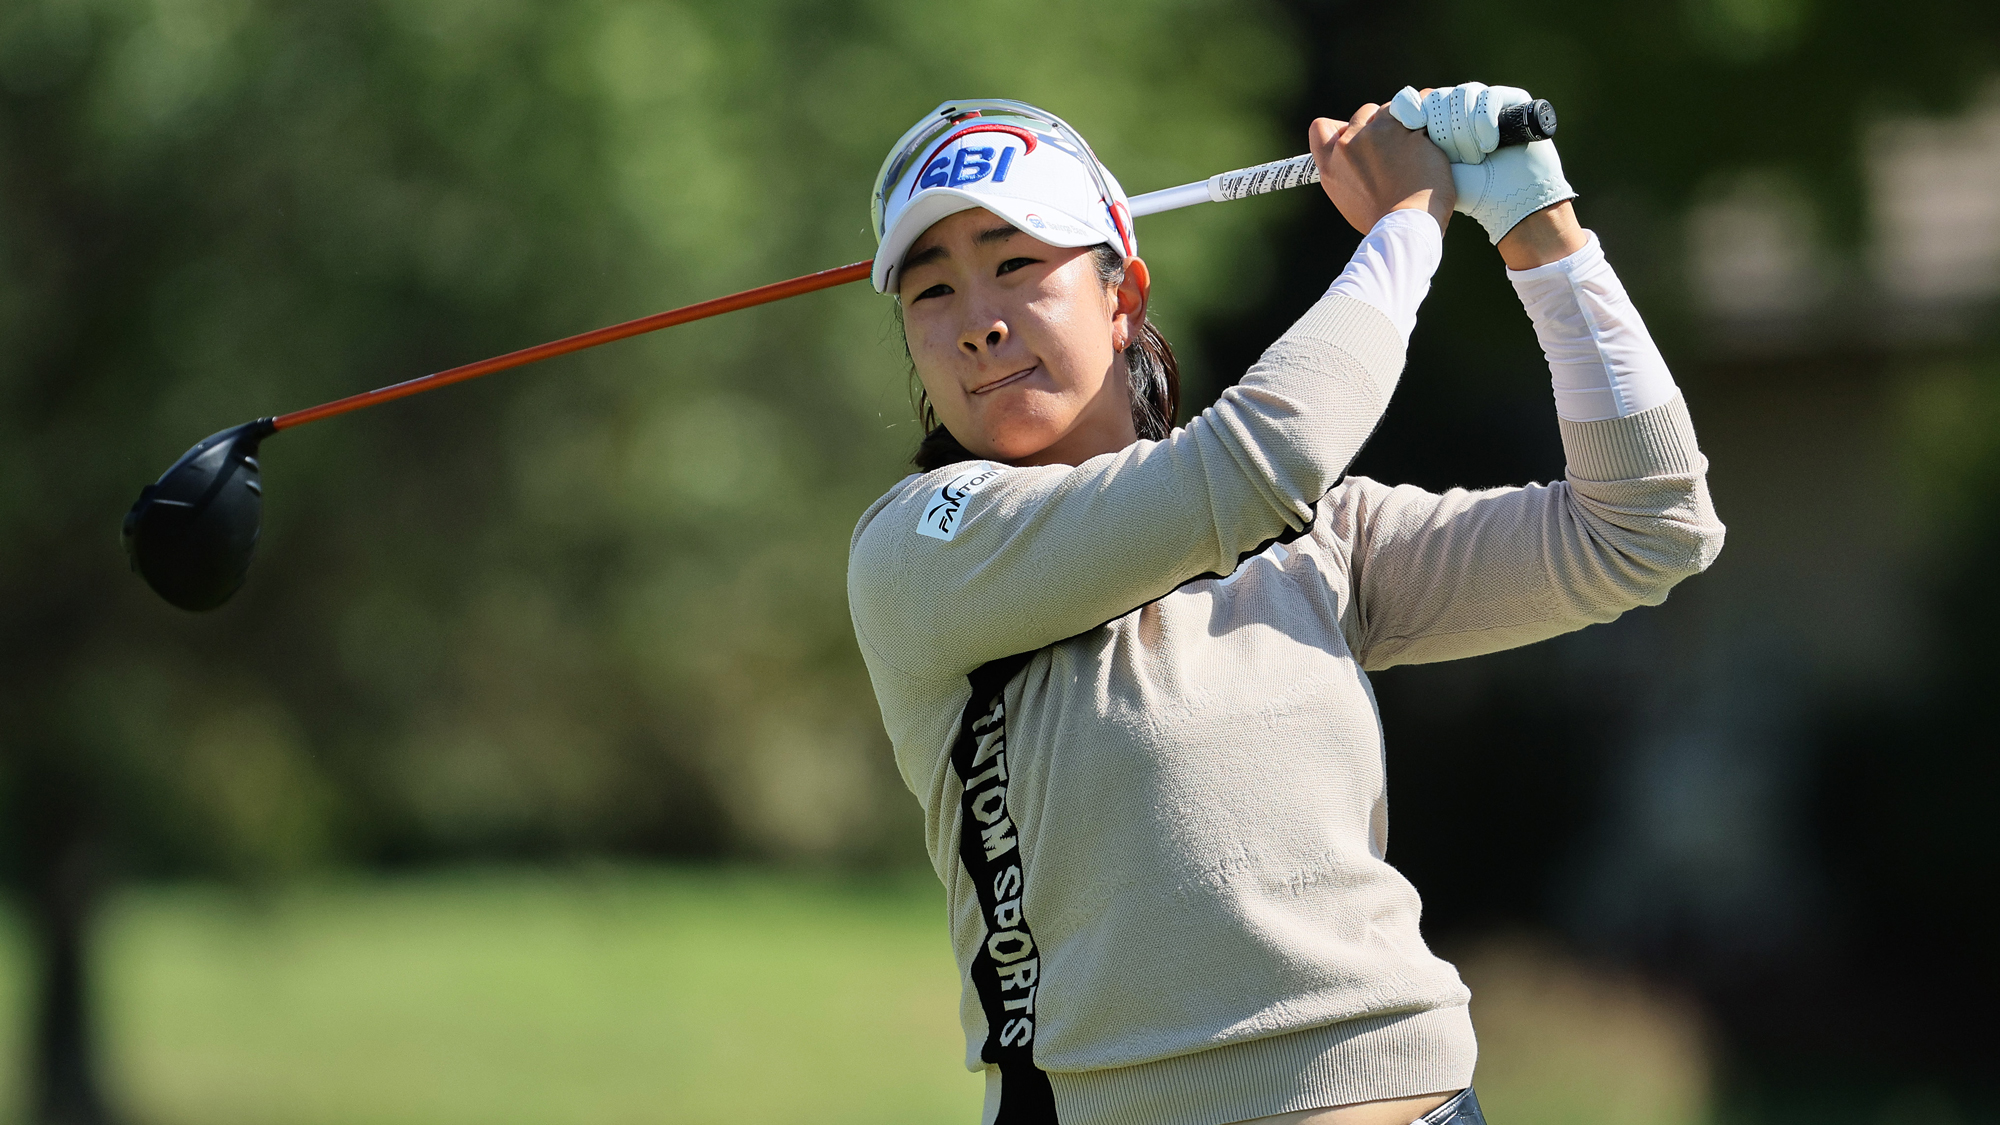 A Lim Kim’s First Ace in Competition at LPGA MEDIHEAL Championship